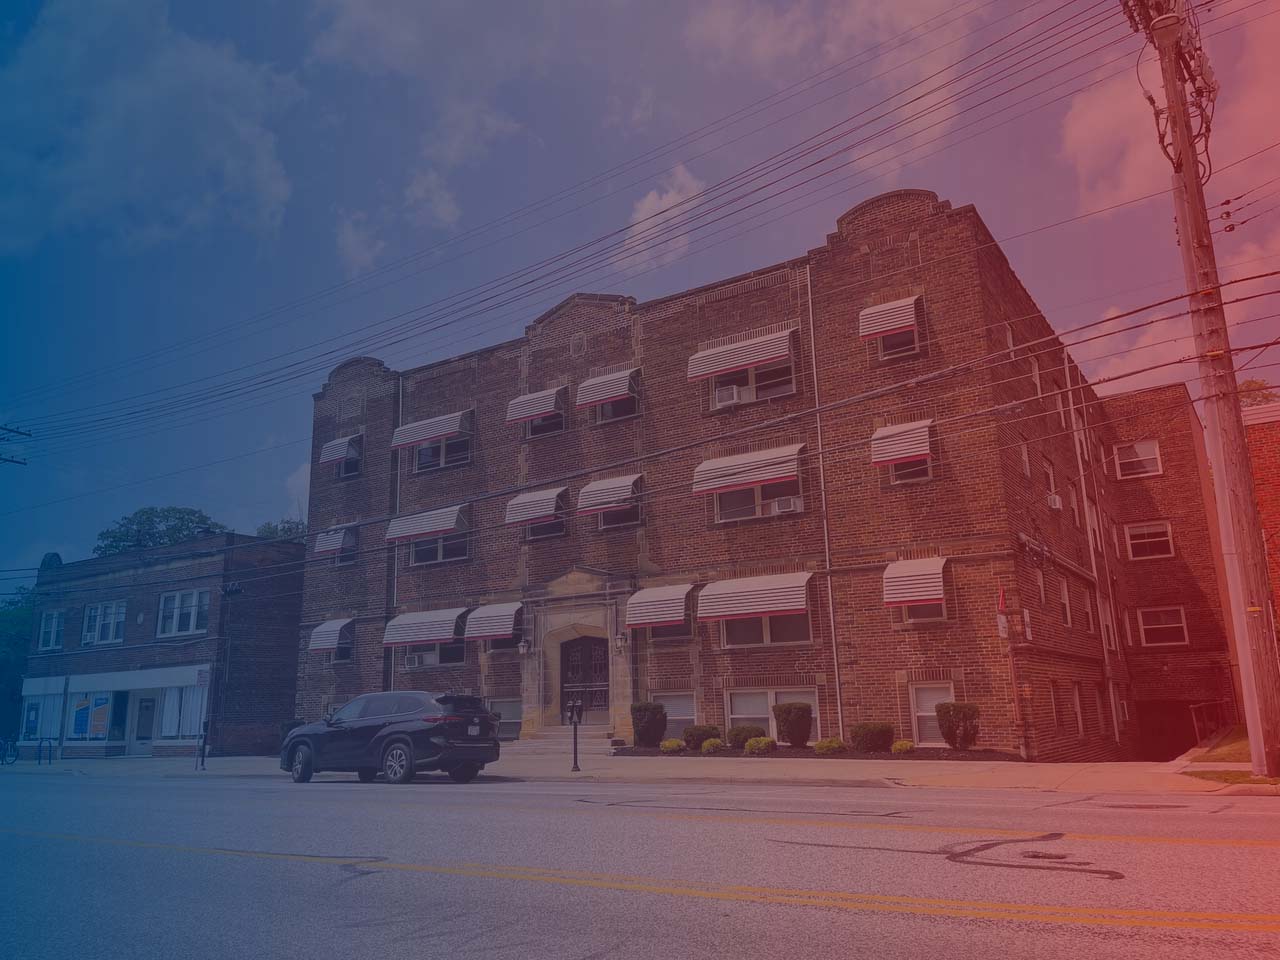 Photo of 16414 Madison St, Cleveland, OH with red and blue gradient overlay.